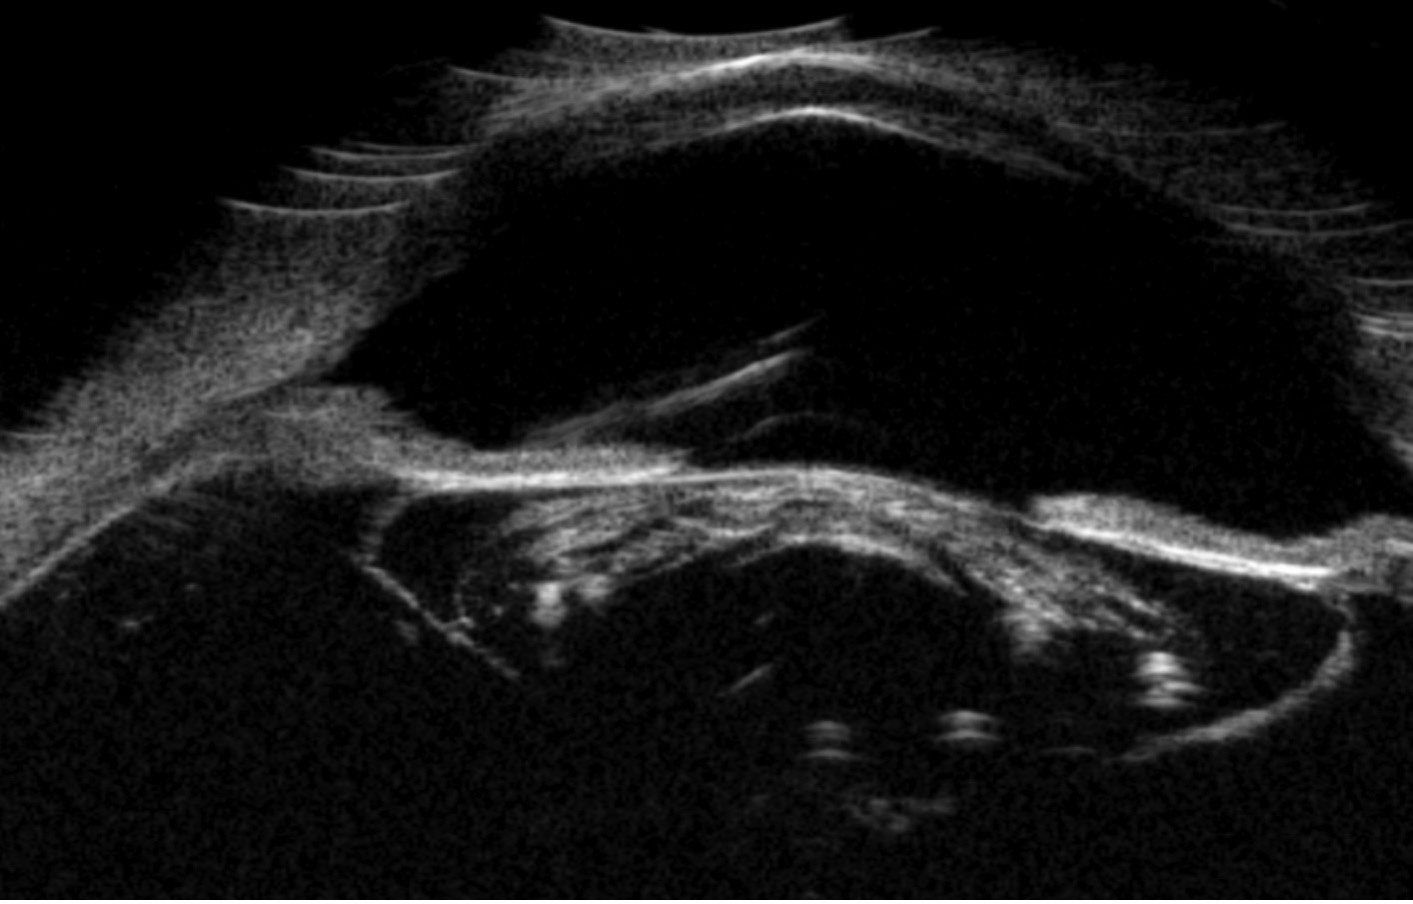 Fig. 4. A thickened mature lens with a very dense cortex causing posterior shadowing. Note the anterior chamber depth is preserved.